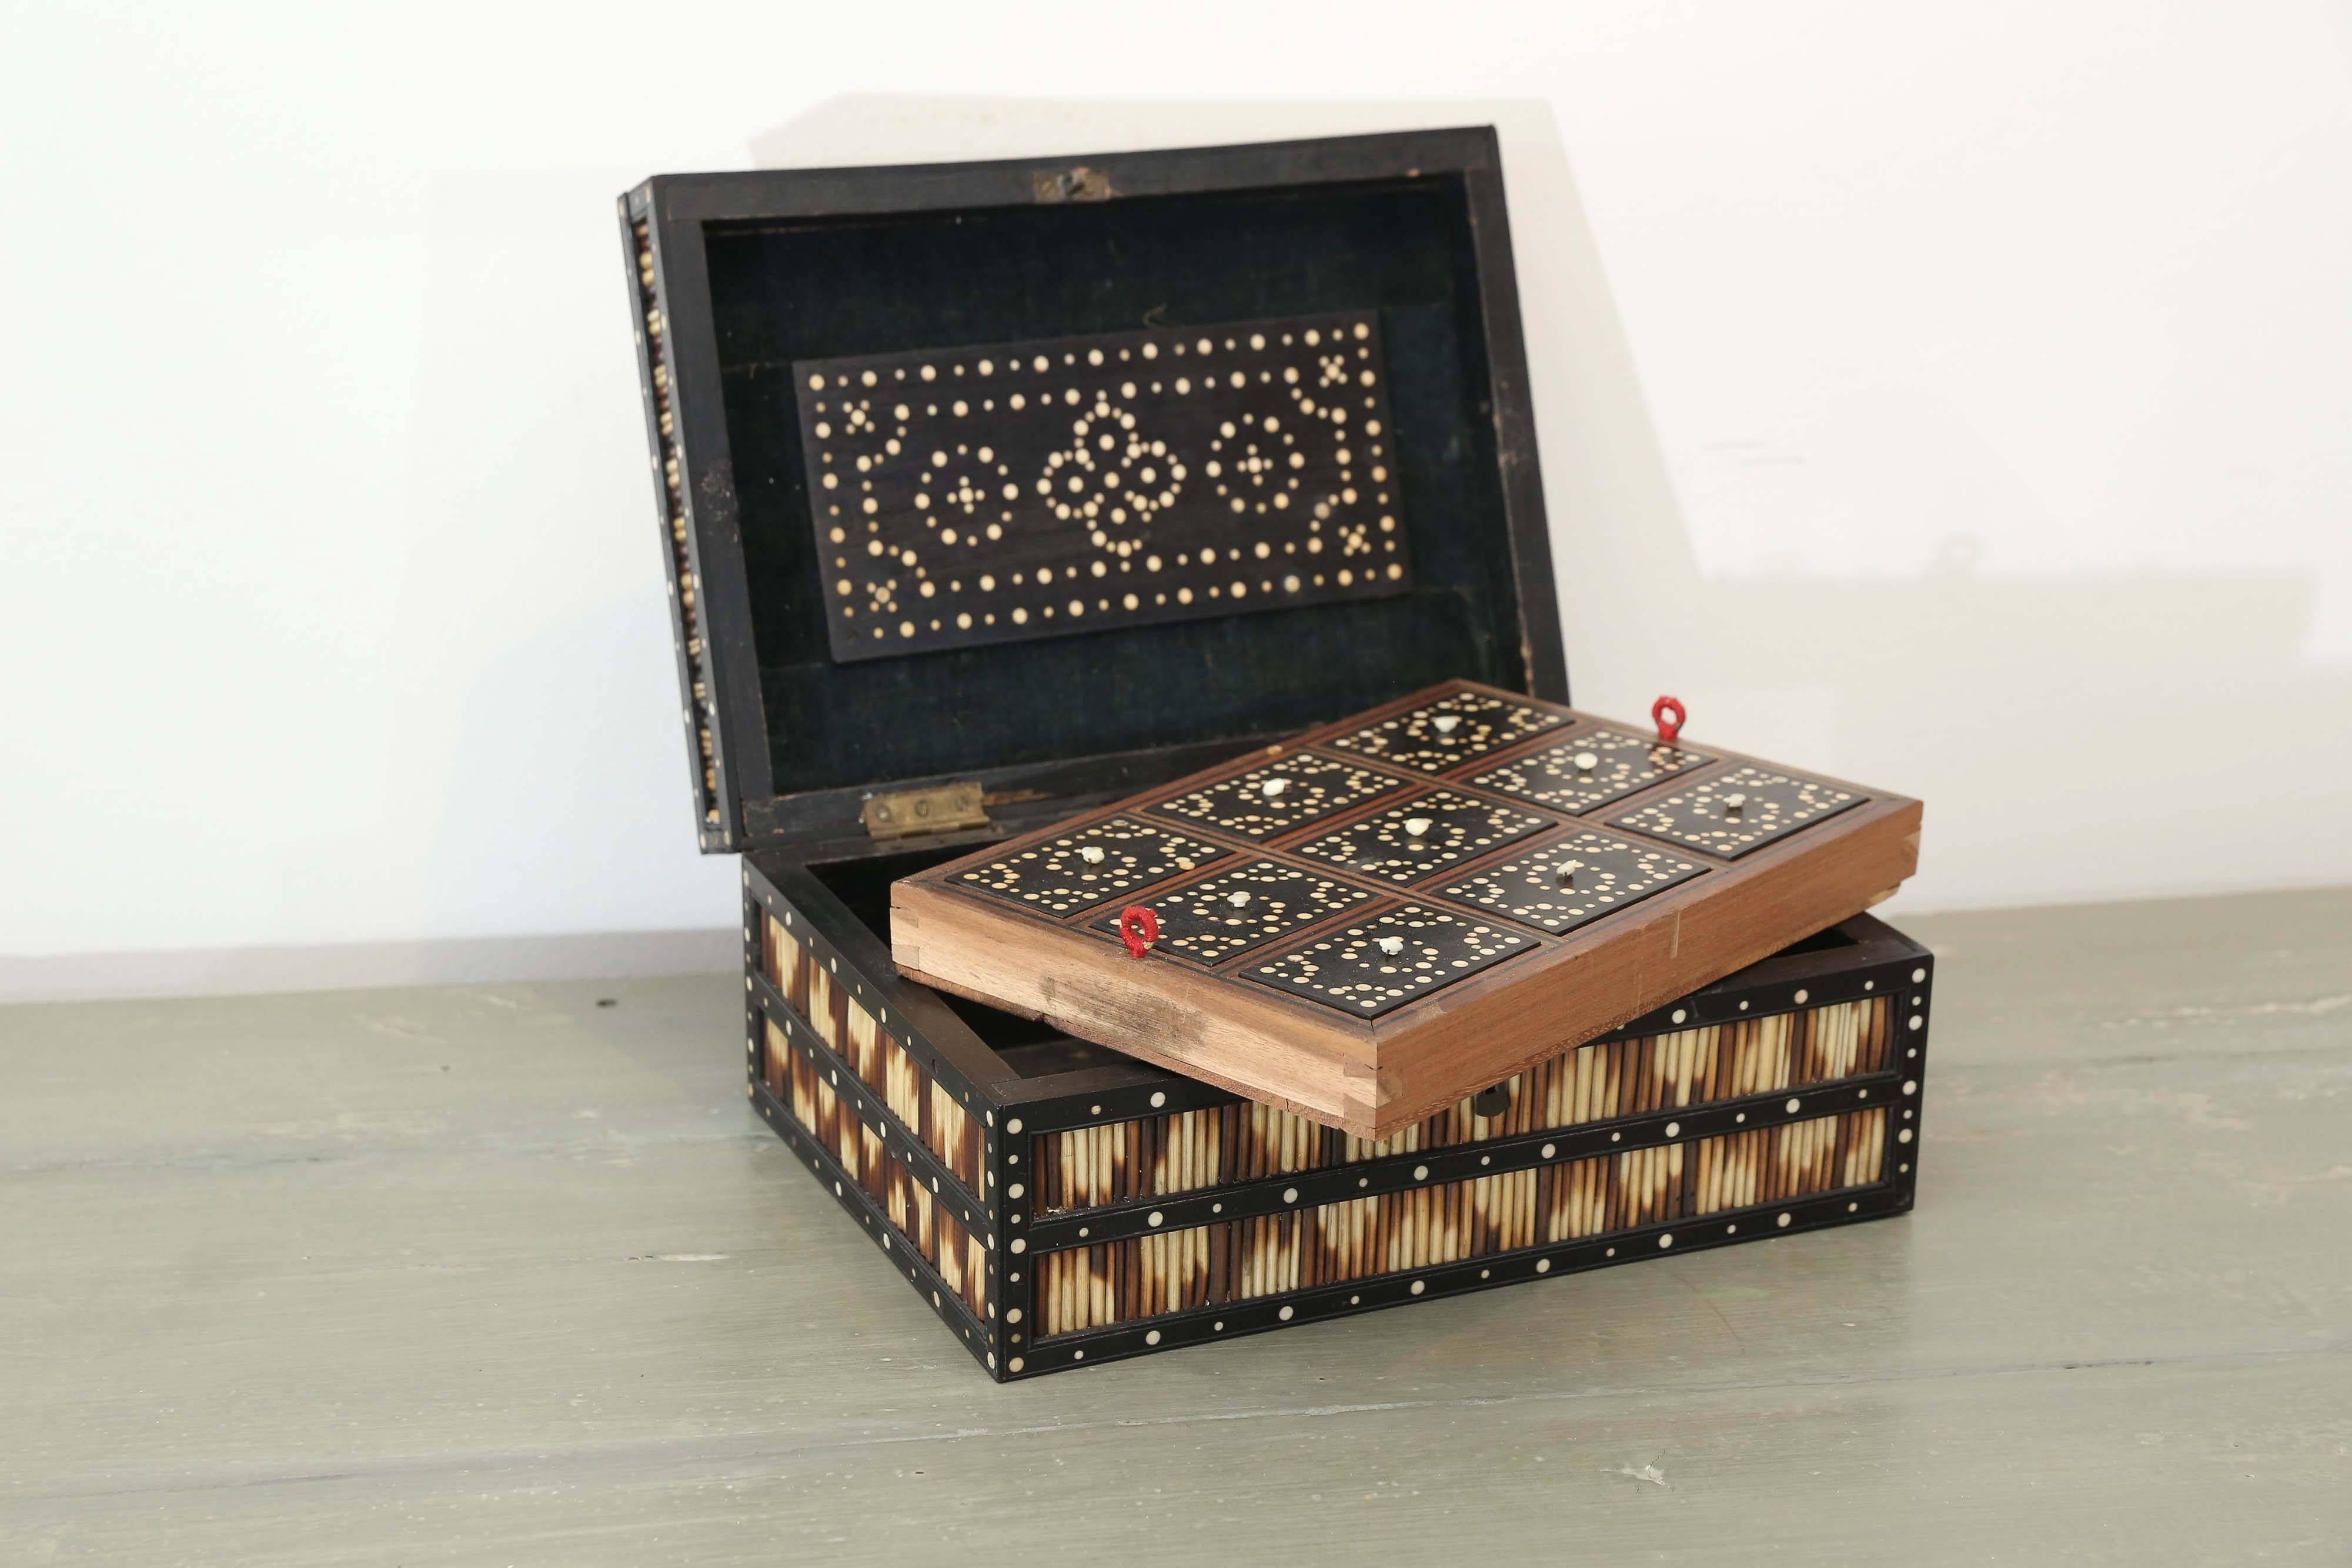 19th century Porcupine quill box with an inset tray with nine individual compartments. Note the design created by the specific placement of the colored quills. A few of the bone circular details are missing. These quill boxes were made in India for